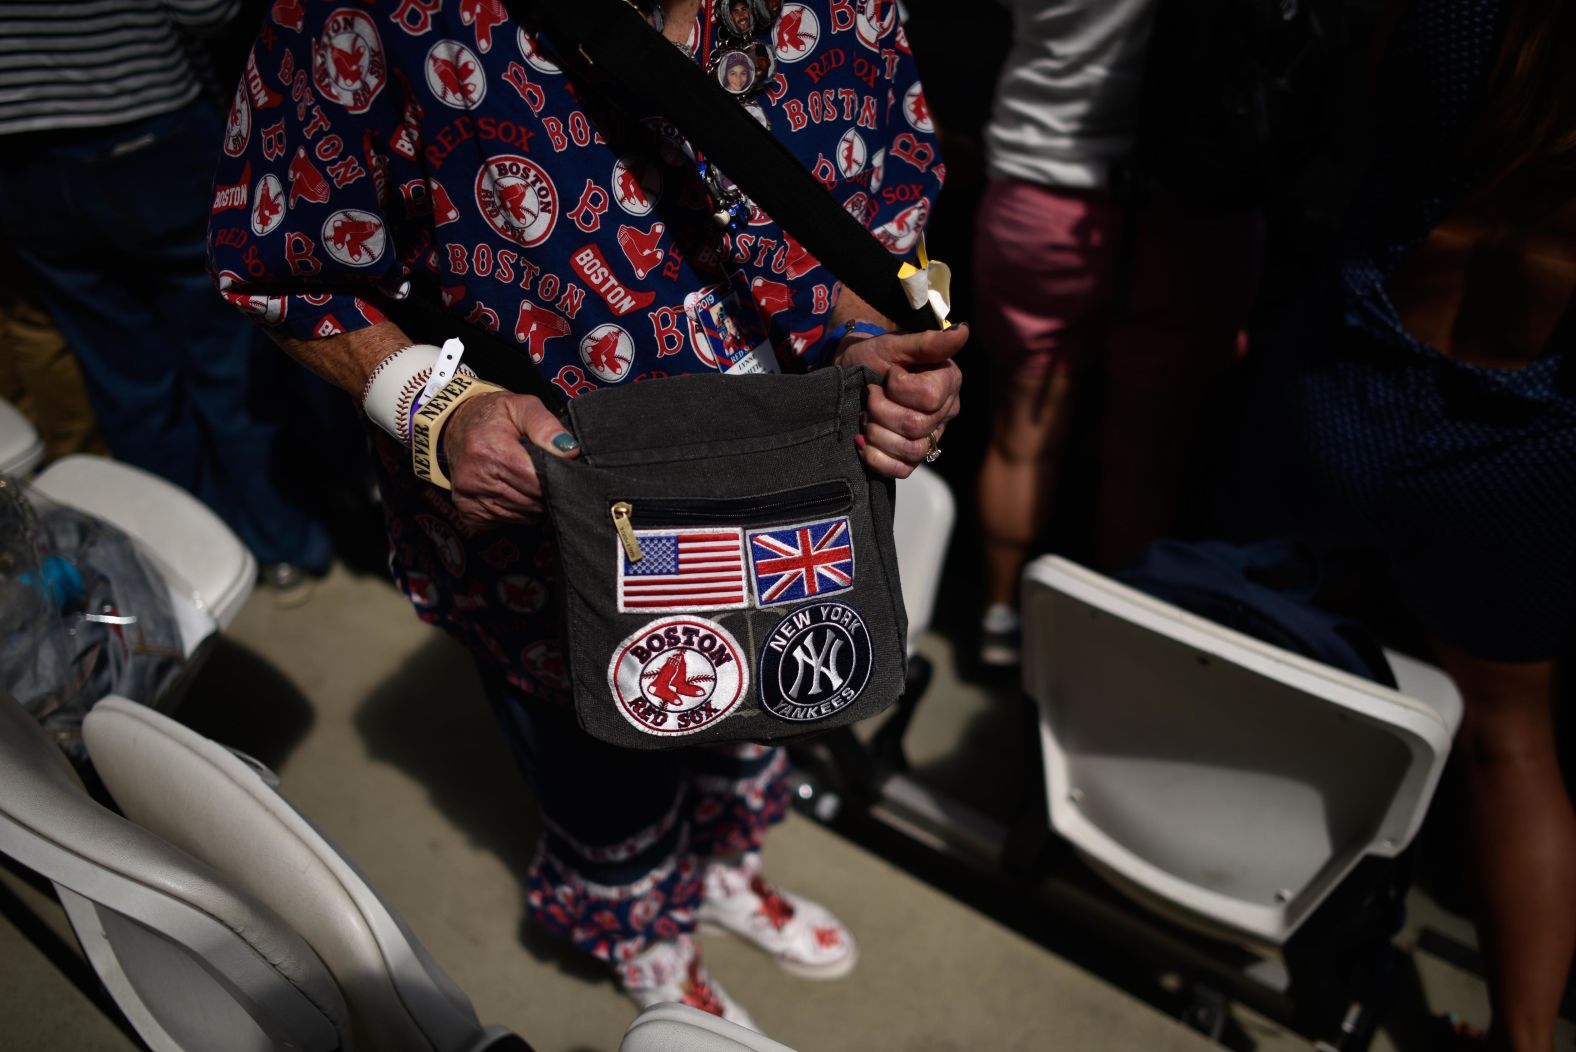 A Boston Red Sox fan shows off her team apparel at London Stadium on Friday, June 28, in London, England.